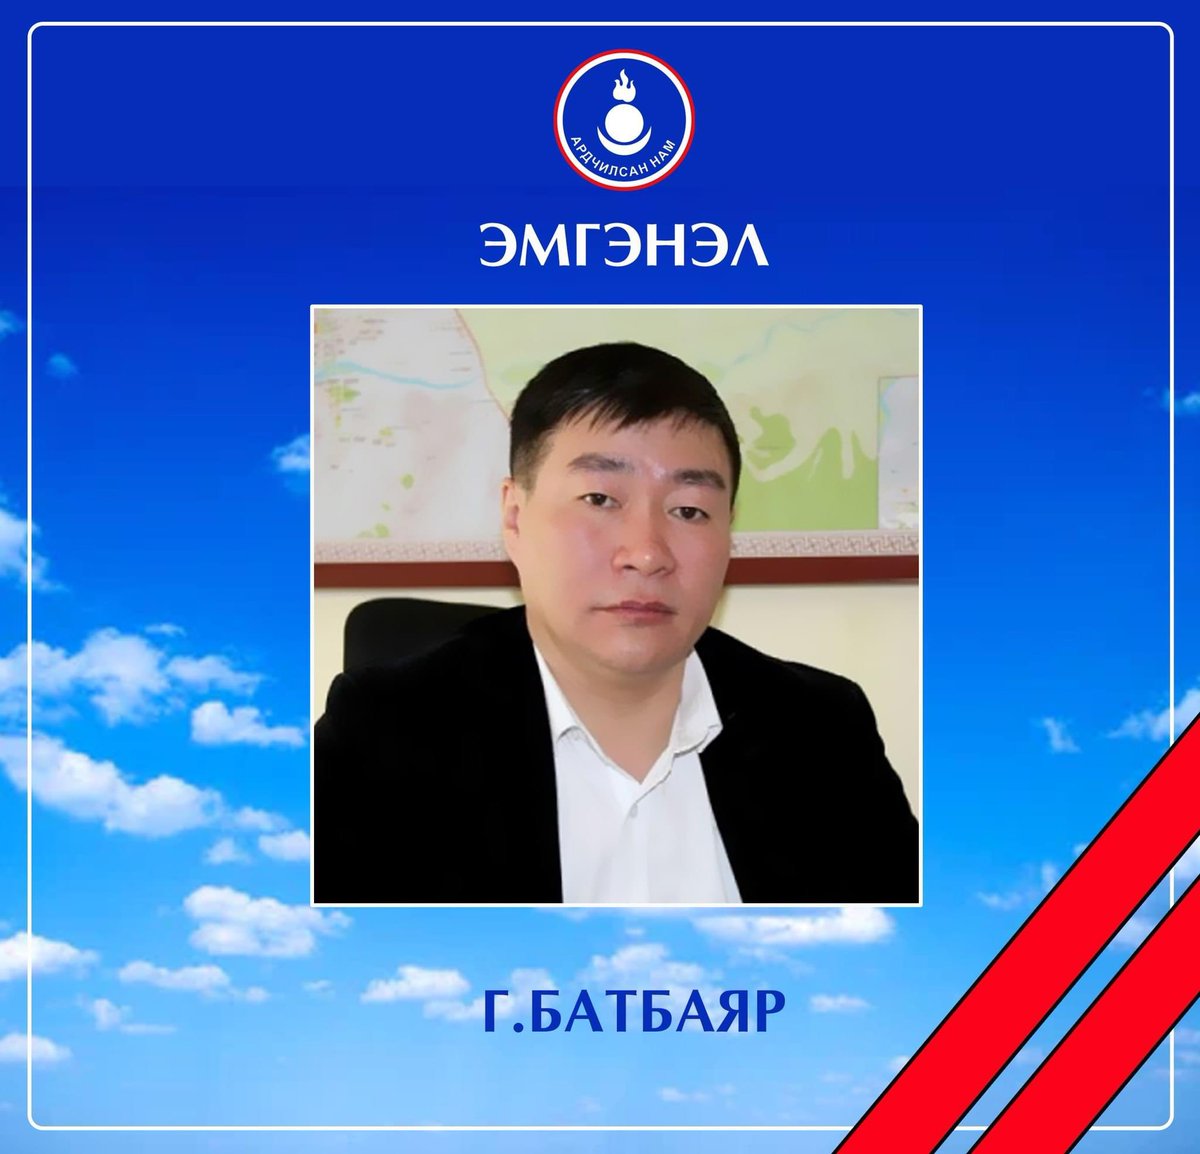 Very worrying developments in Mongolia. One time opposition Democratic Party's legal advisor, advocate G.Batbayar has been found dead under dubious circumstances. Civil society & many ppl 'familiar with the matter' are already pointing finger at the Deputy PM S.Amarsaikhan ...